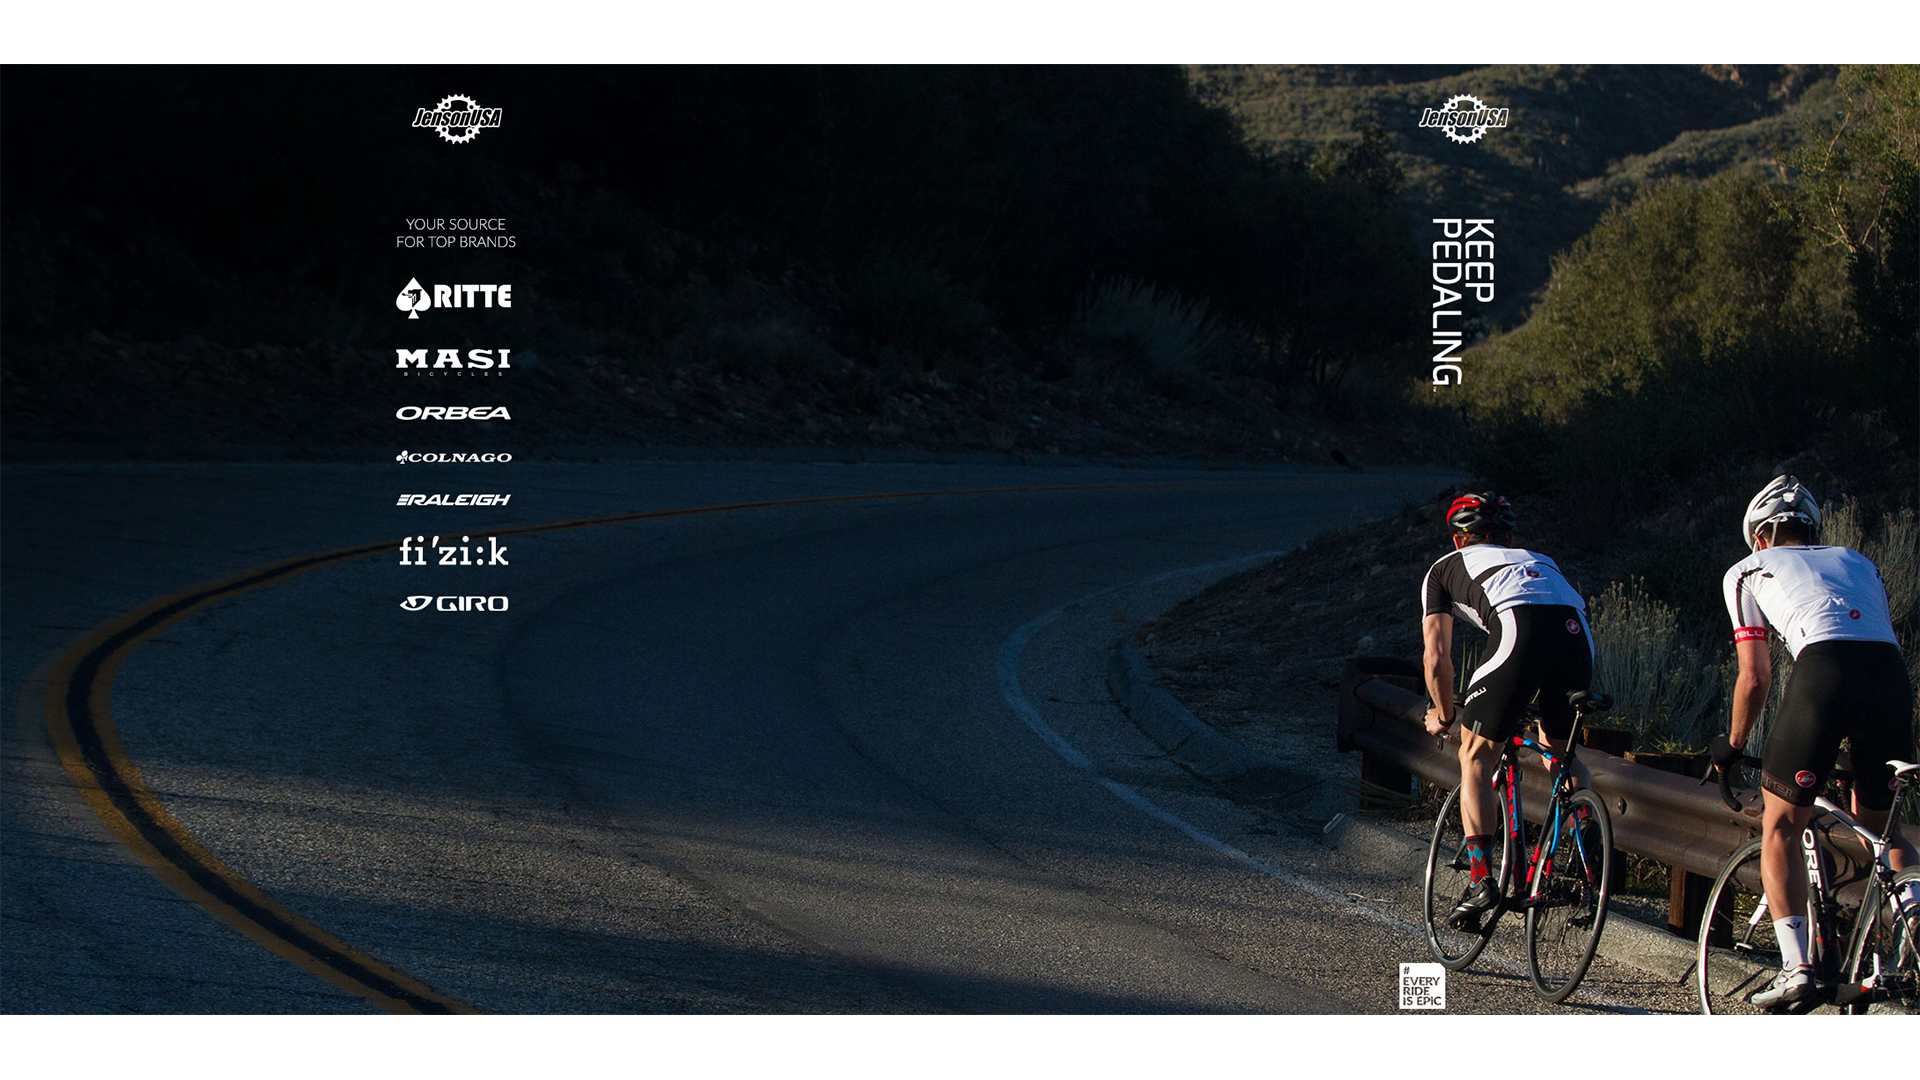 Road bike review takeover skin featuring imagery from road cycling campaign silverwood lake